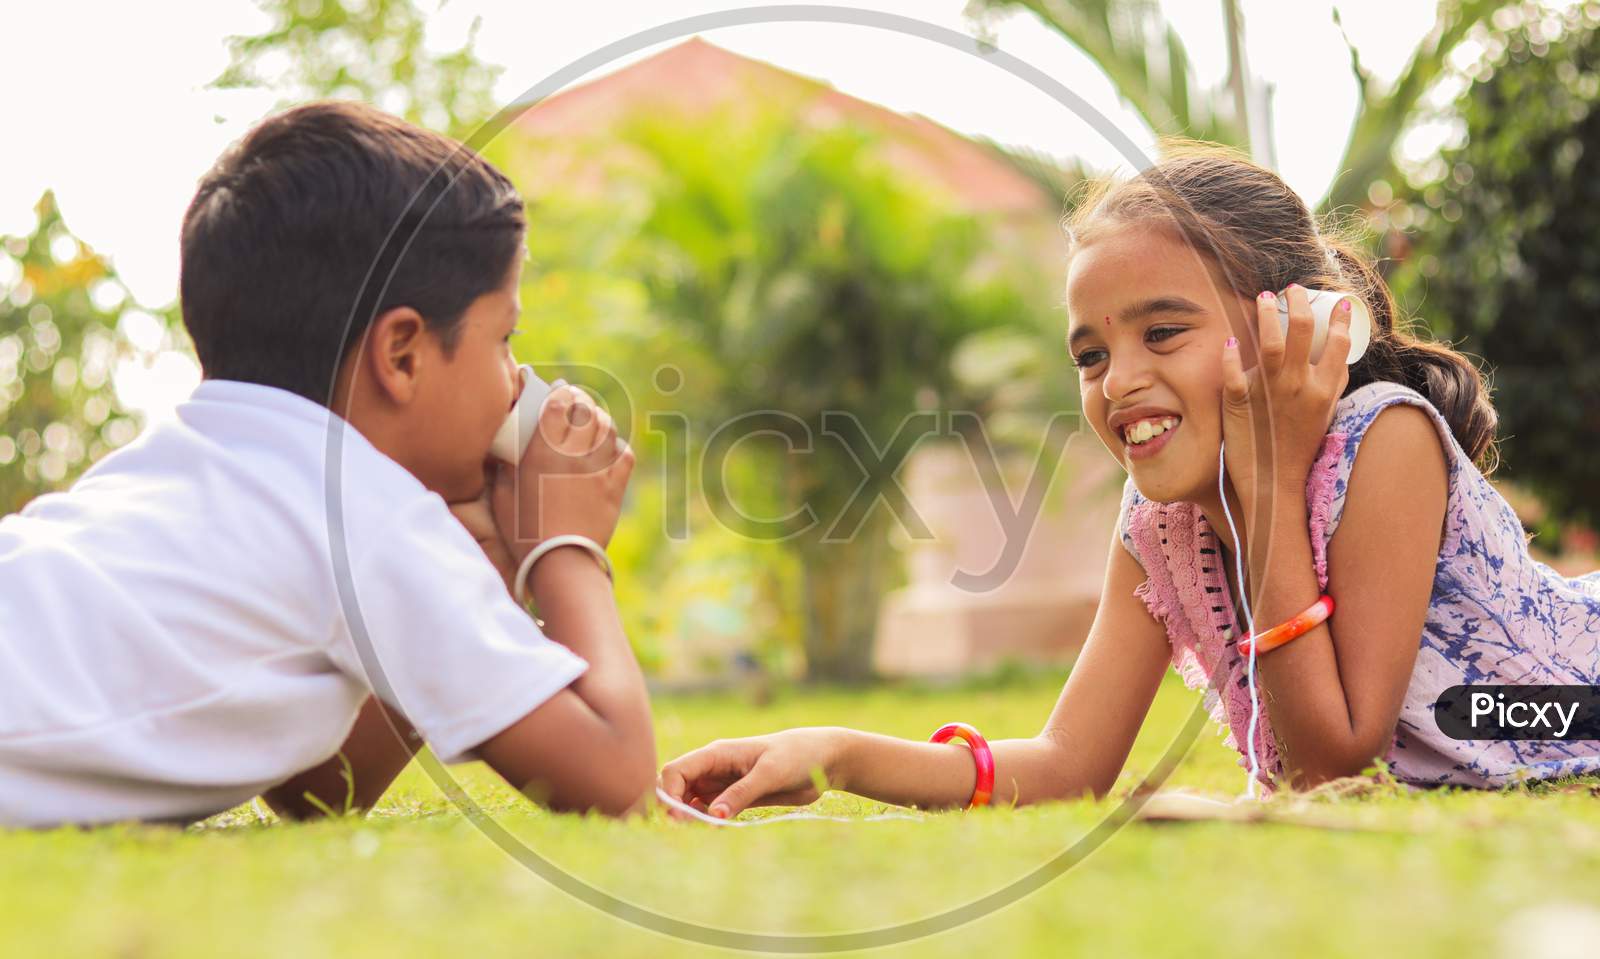 Two Children Having Fun By Playing With String Telephone At Park During Vacation - Concept Of Brain Development And Socializing By Playing Outdoor Games In The Technology Driven World.